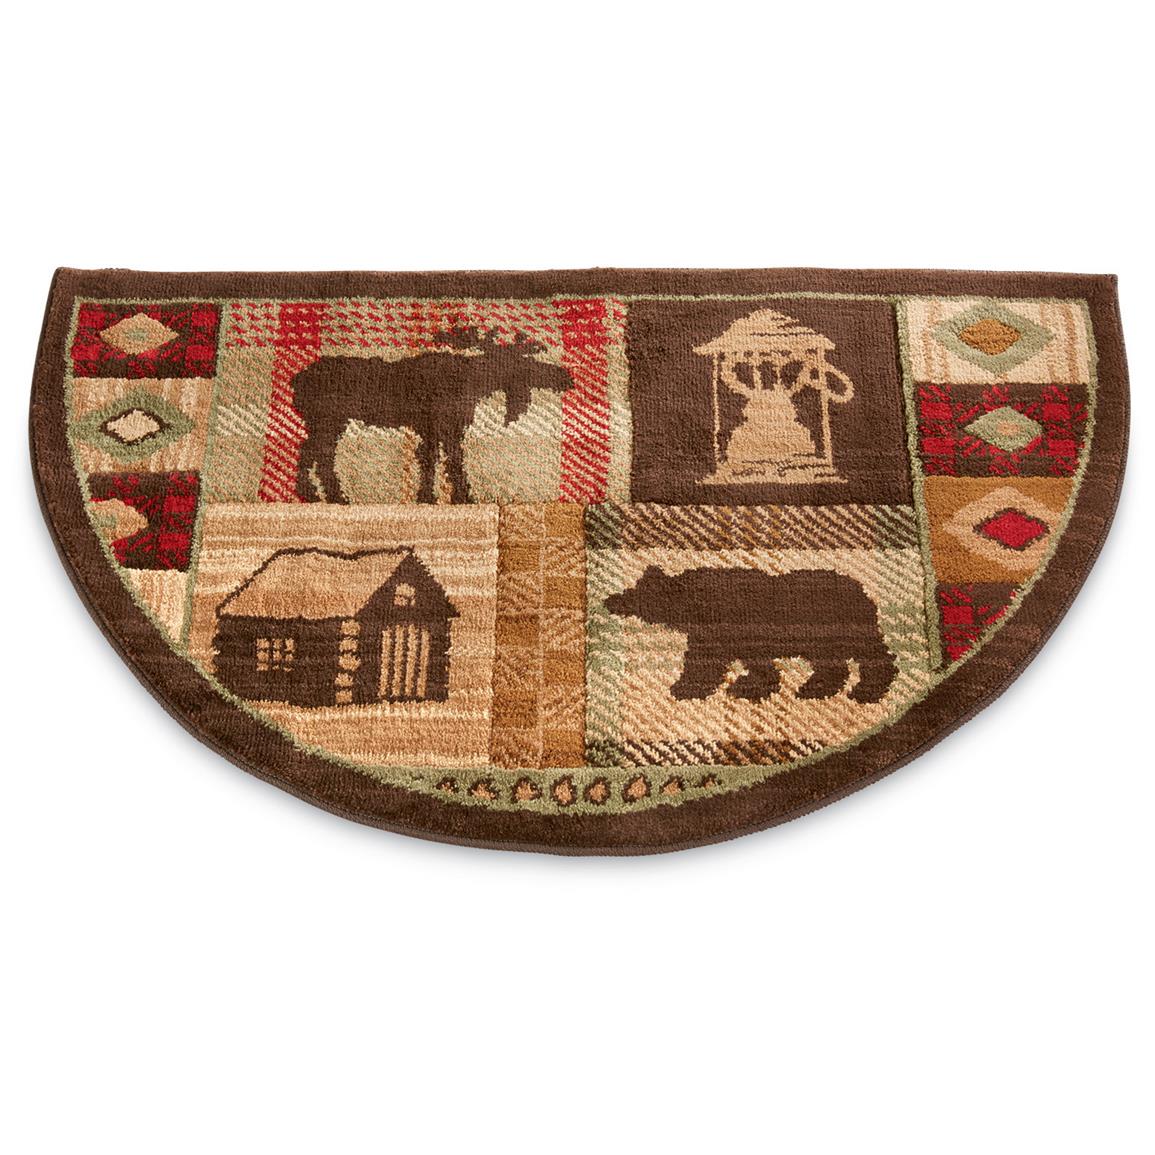 Mohawk Lodge Hearth Rug - 233354, Rugs at Sportsman's Guide